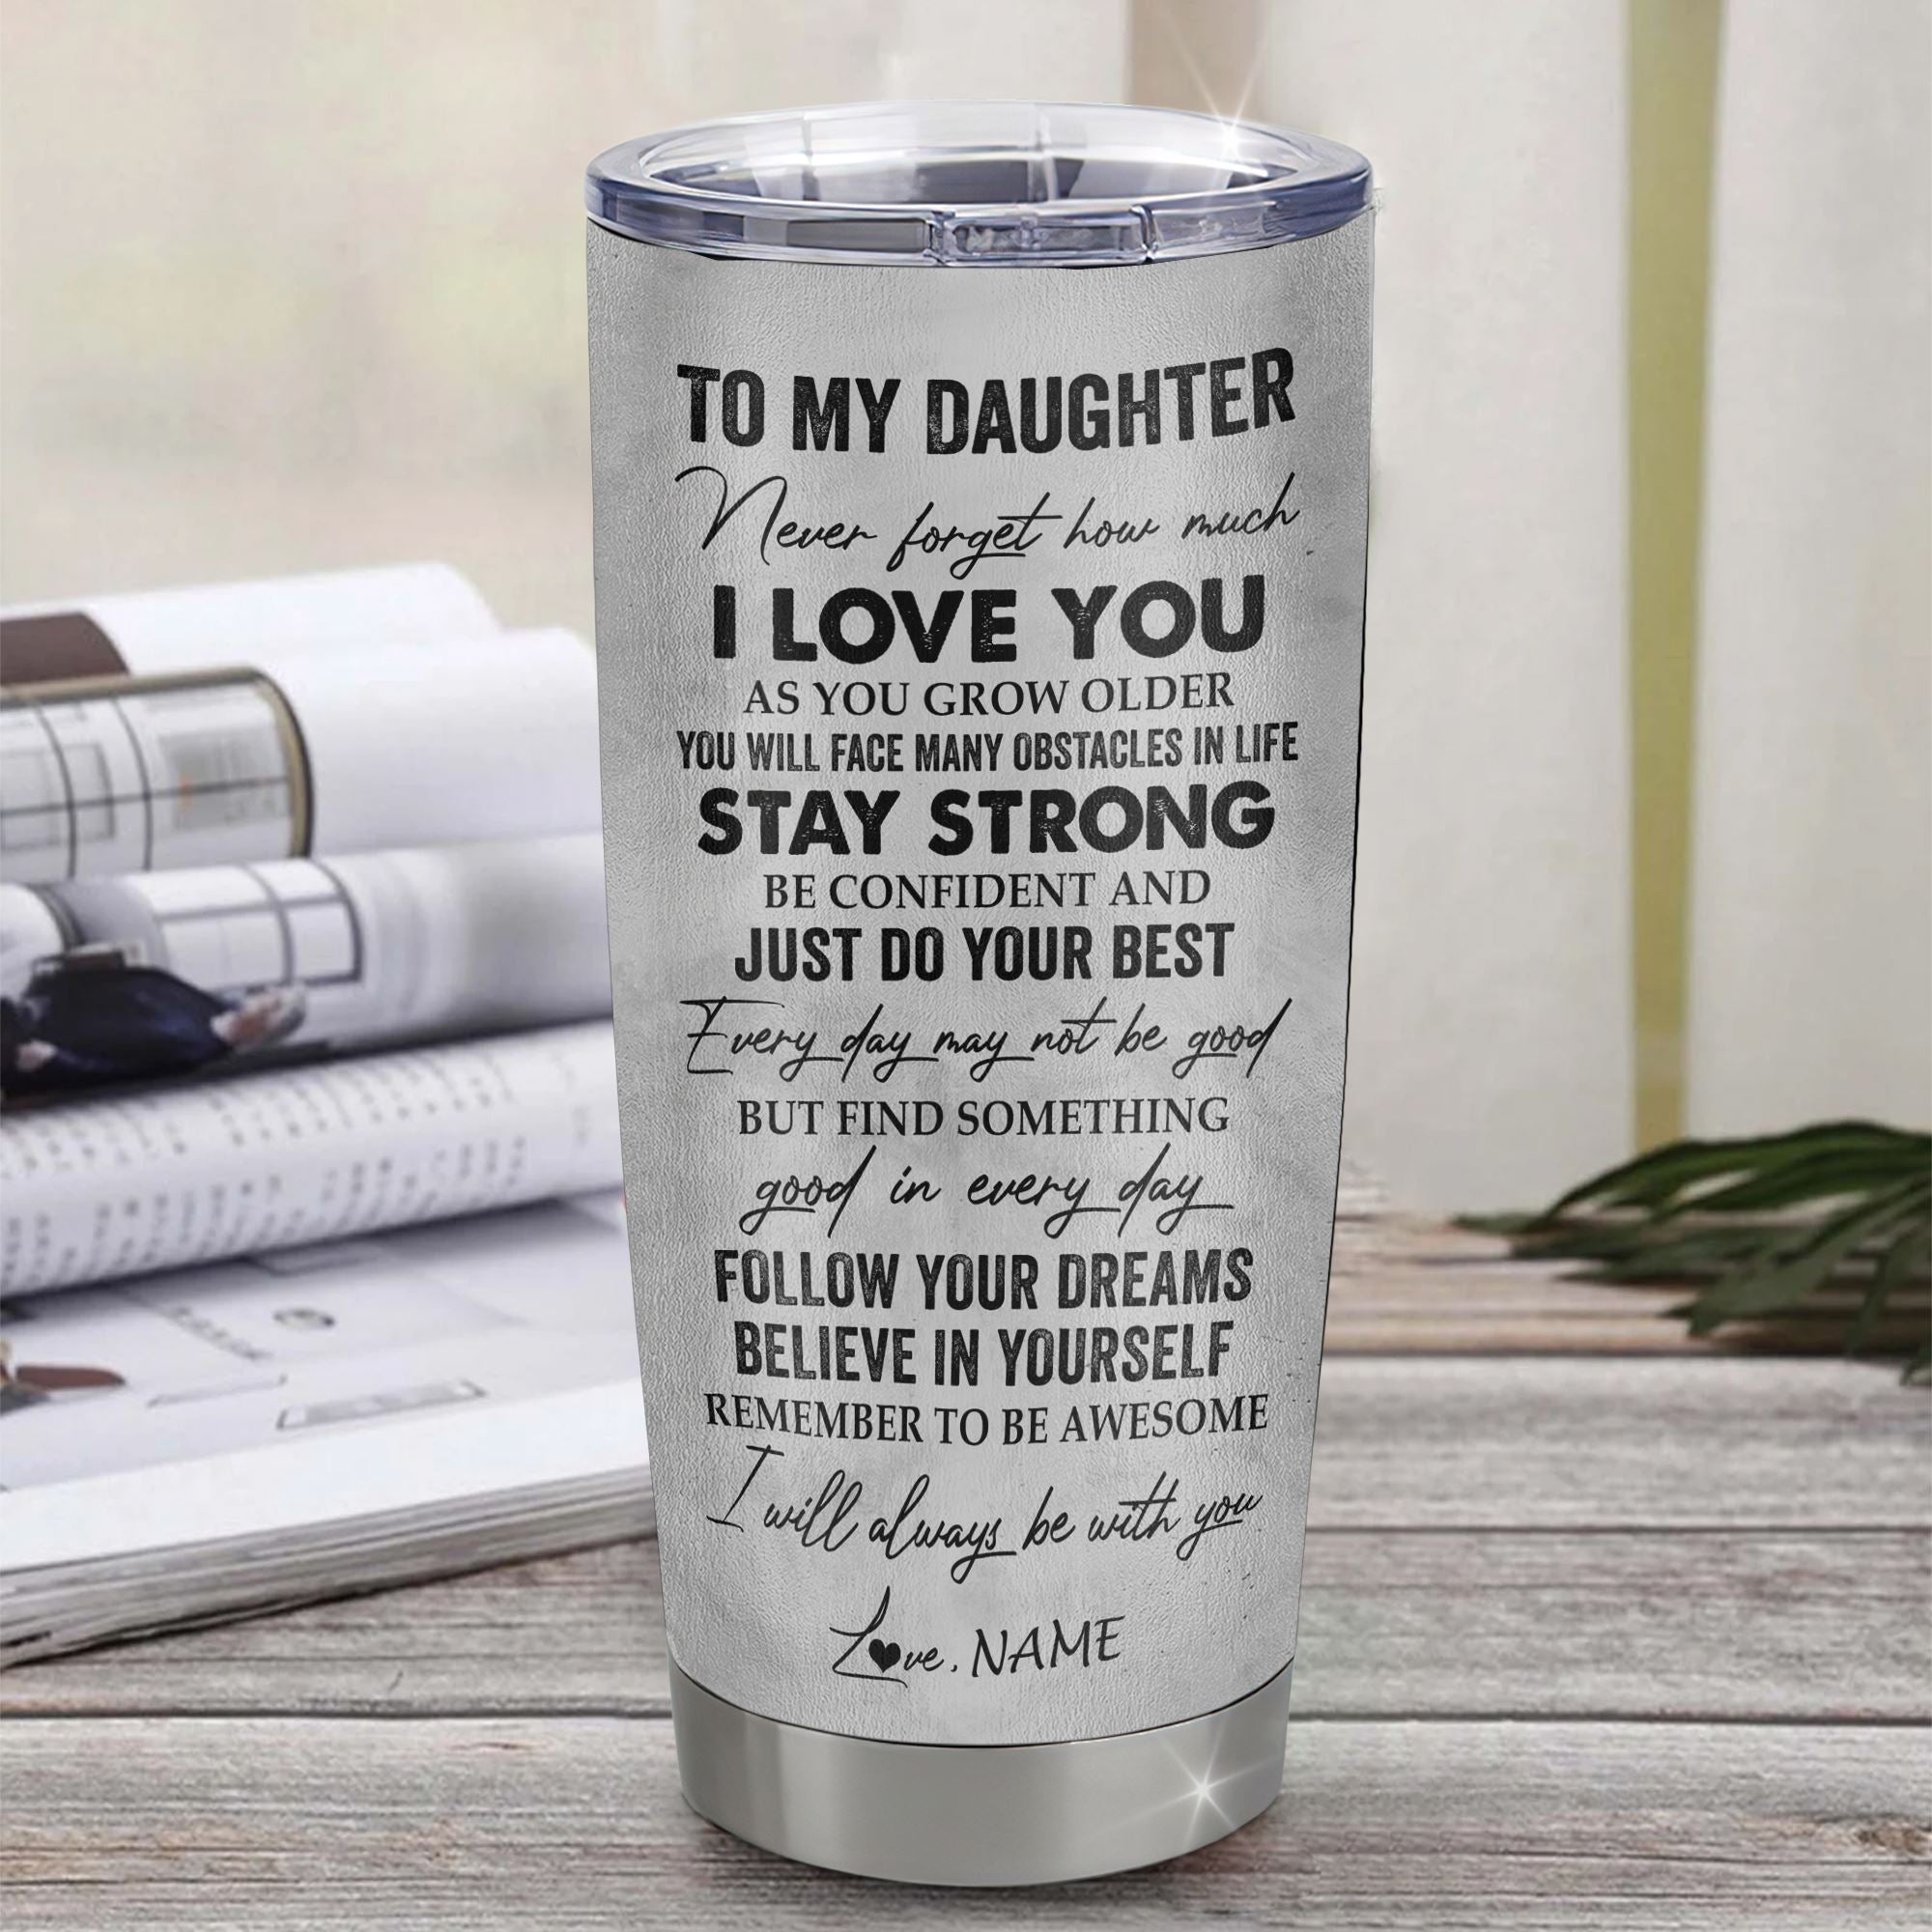 Personalized_To_My_Daughter_Tumbler_From_Dad_Father_Stainless_Steel_Cup_I_Love_You_With_All_My_Heart_Daughter_Birthday_Graduation_Christmas_Travel_Mug_Tumbler_mockup_1.jpg